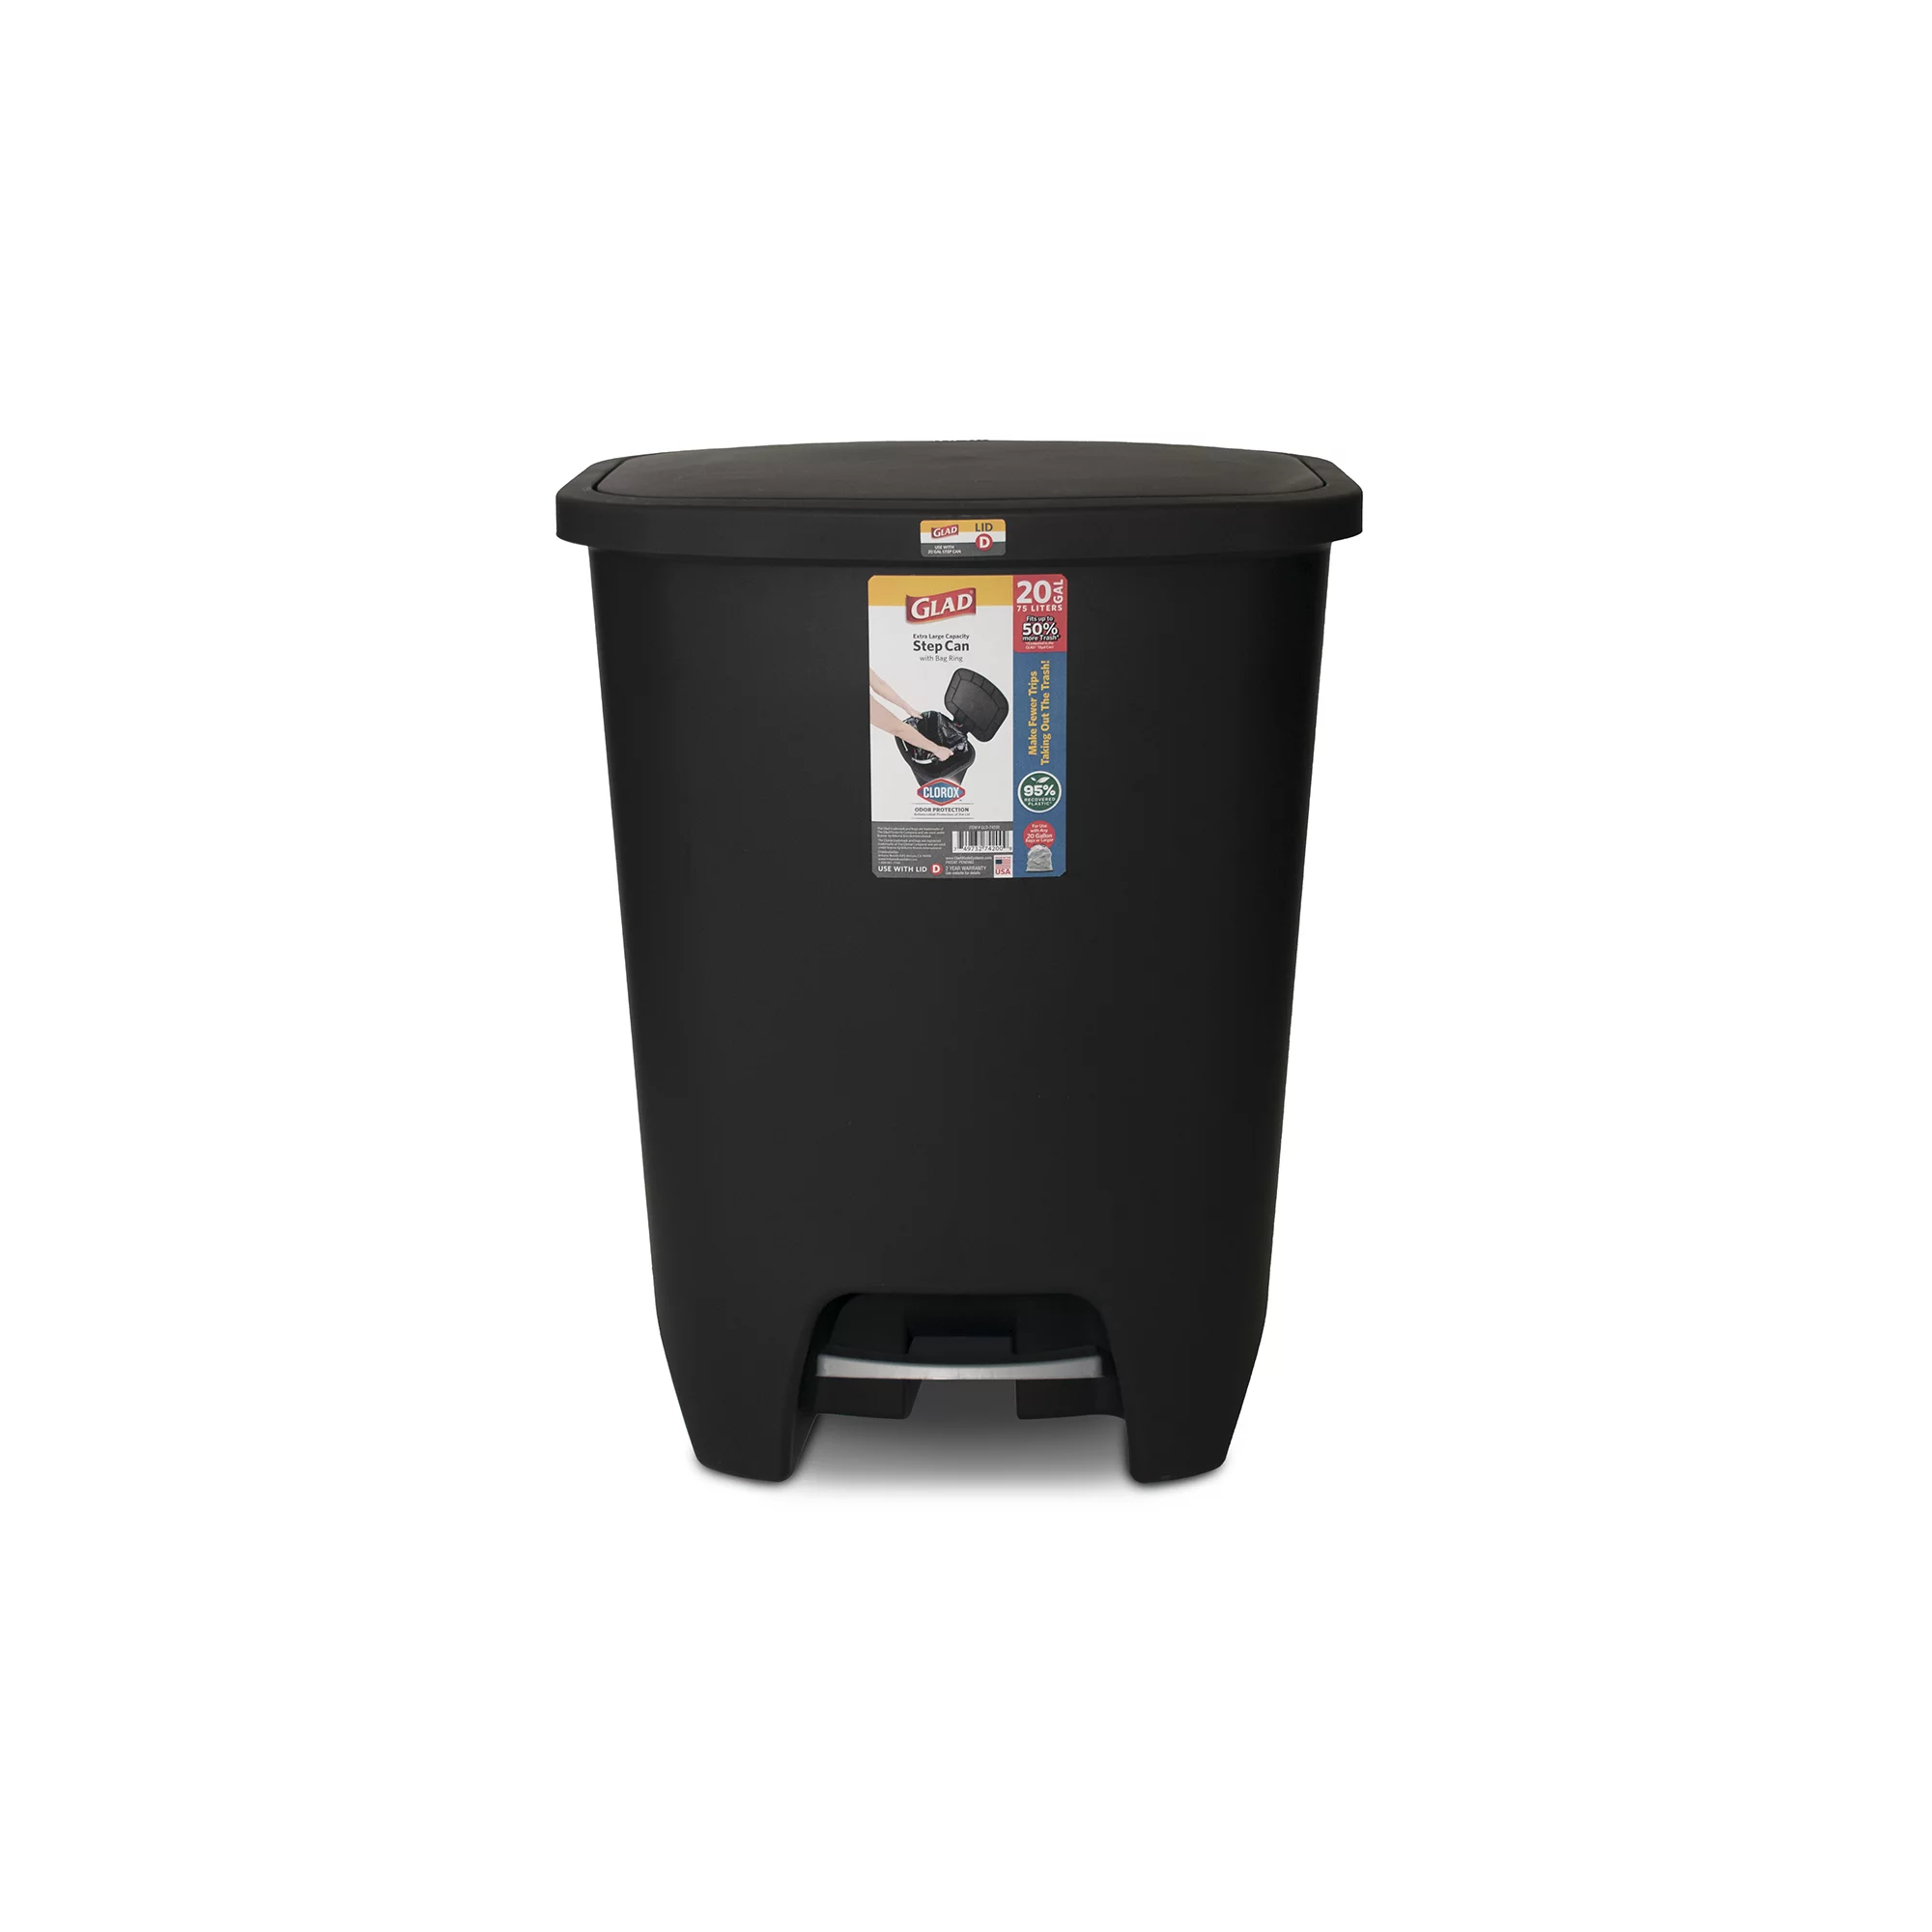 GLAD 20 Gallon Plastic Kitchen Trash Can Step on Garbage Can With Lid & Bag  Ring